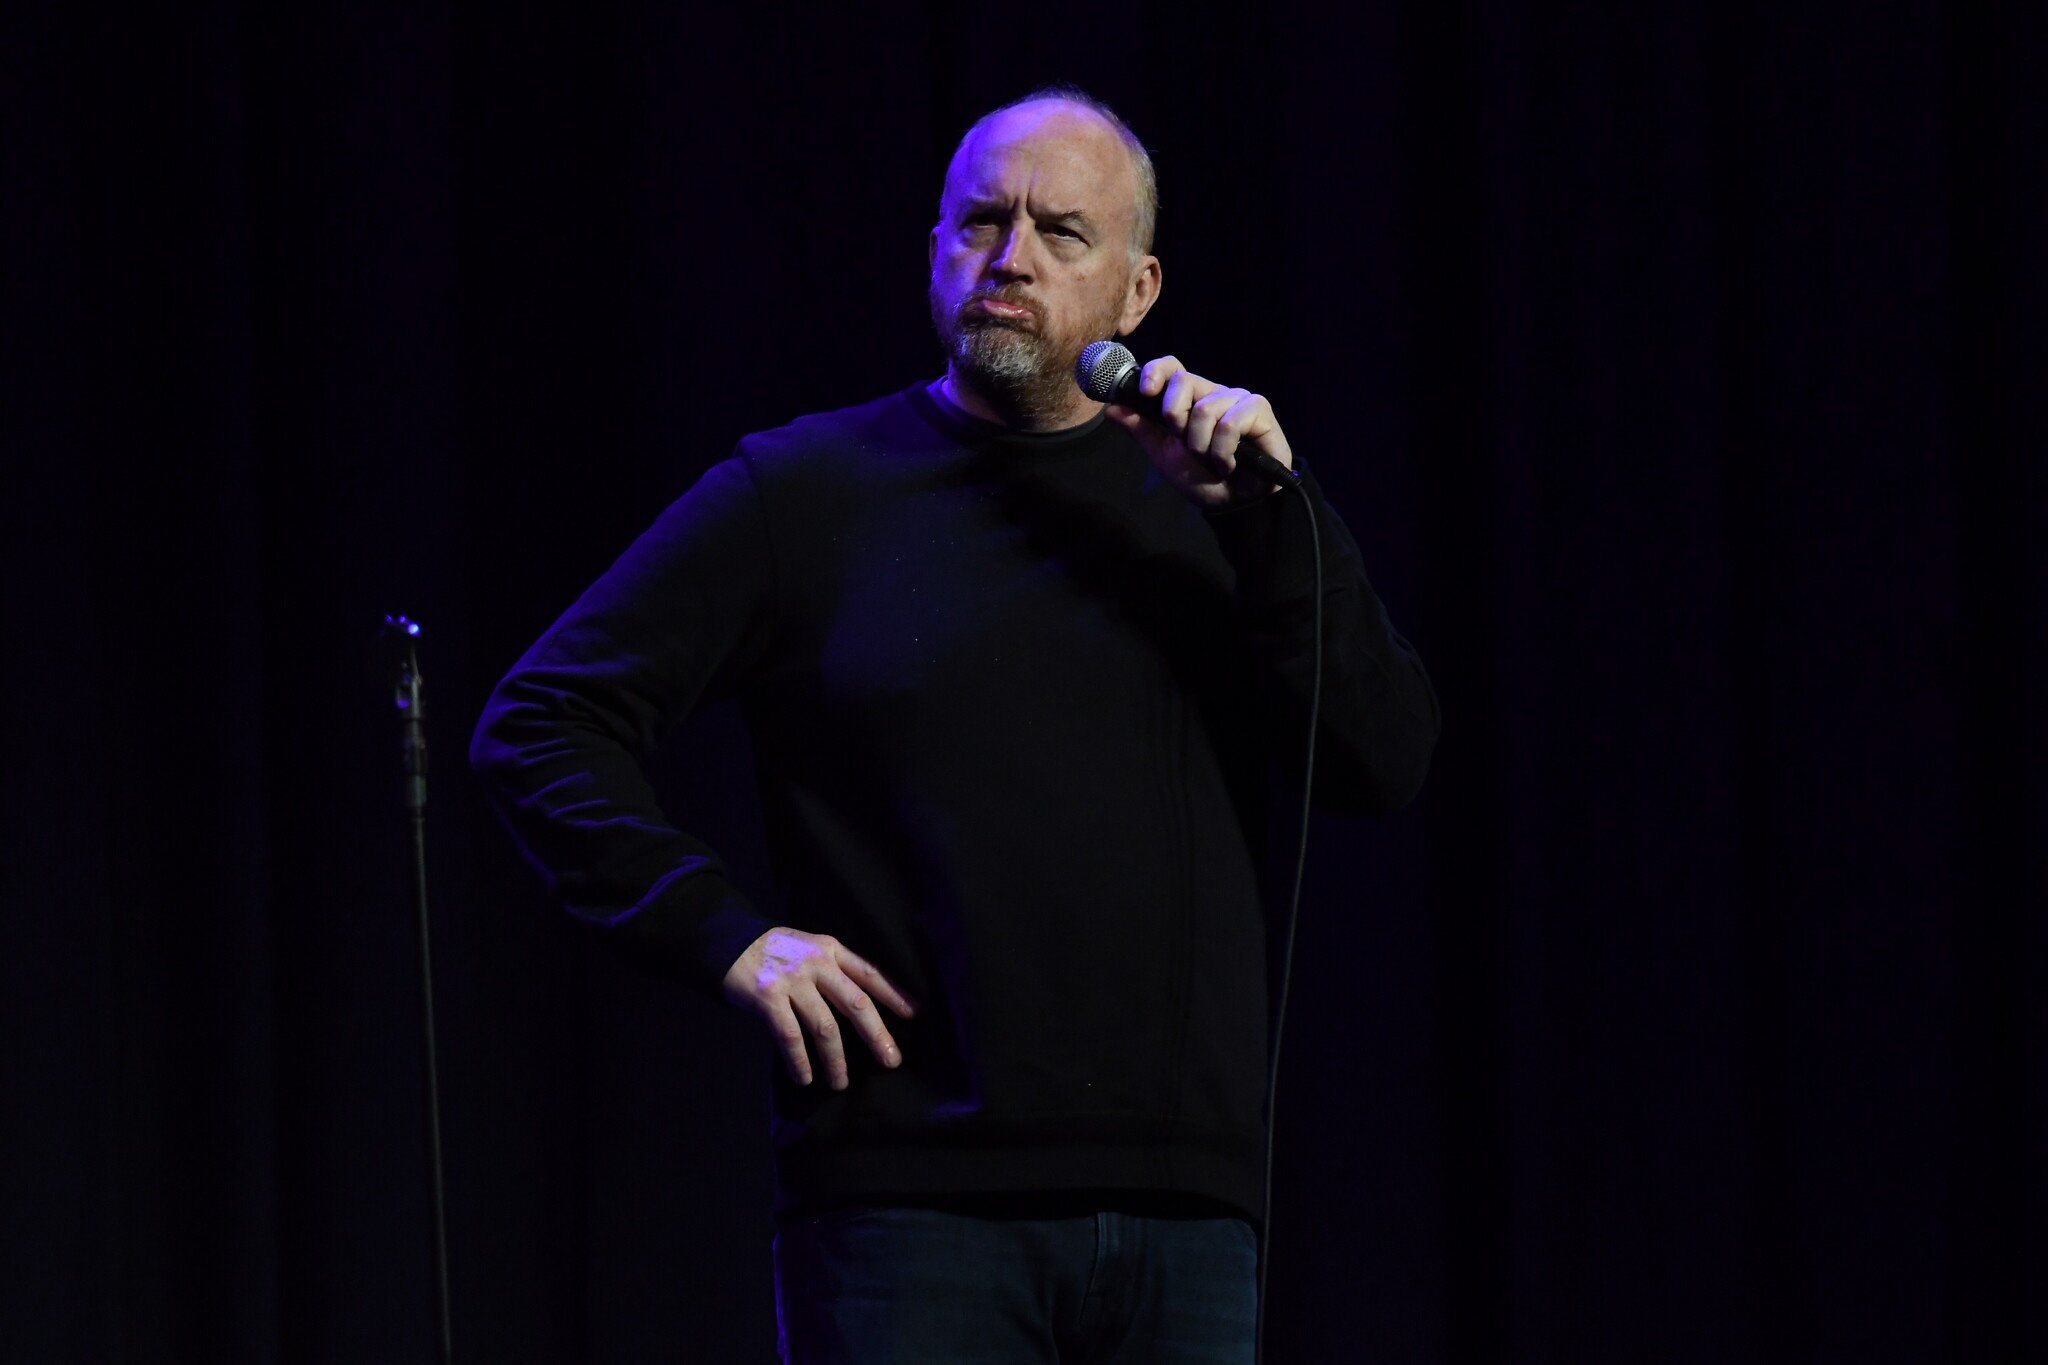 Back in Israel, Louis C.K. begins with the one topic he can't avoid